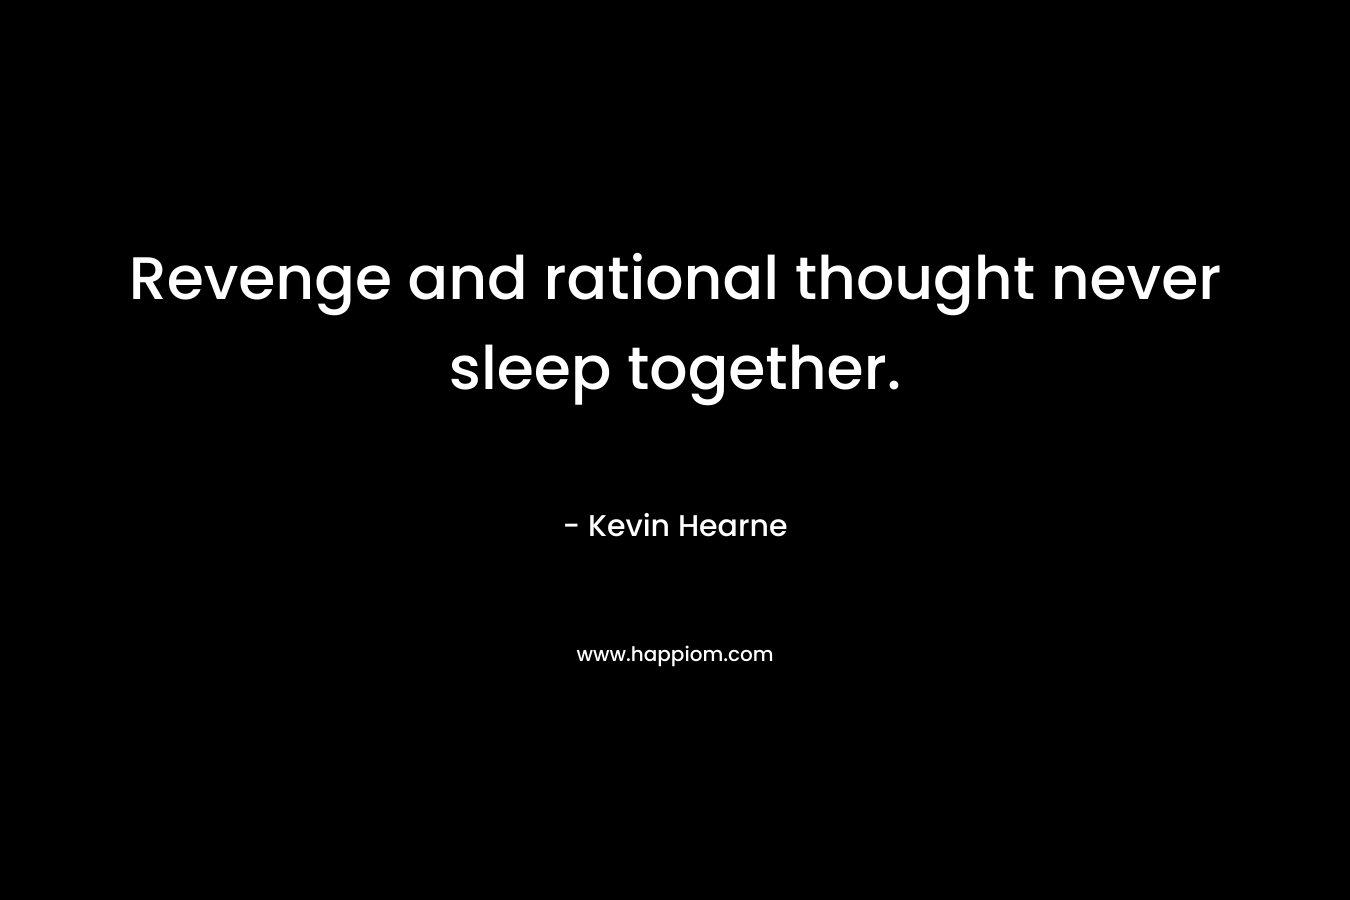 Revenge and rational thought never sleep together. – Kevin Hearne